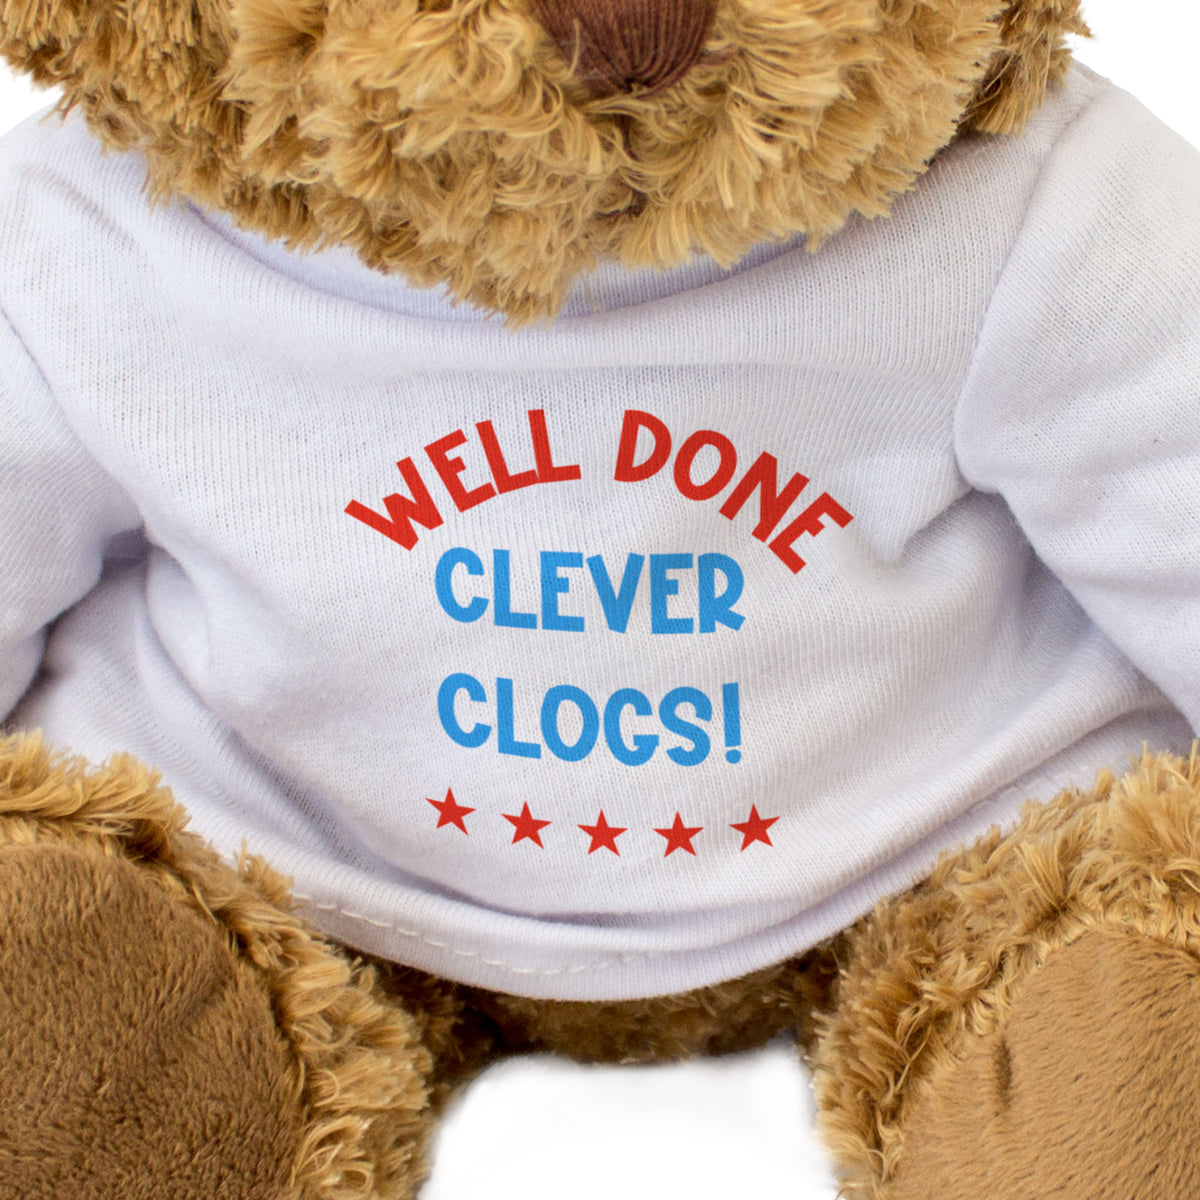 Well Done Clever Clogs - Teddy Bear